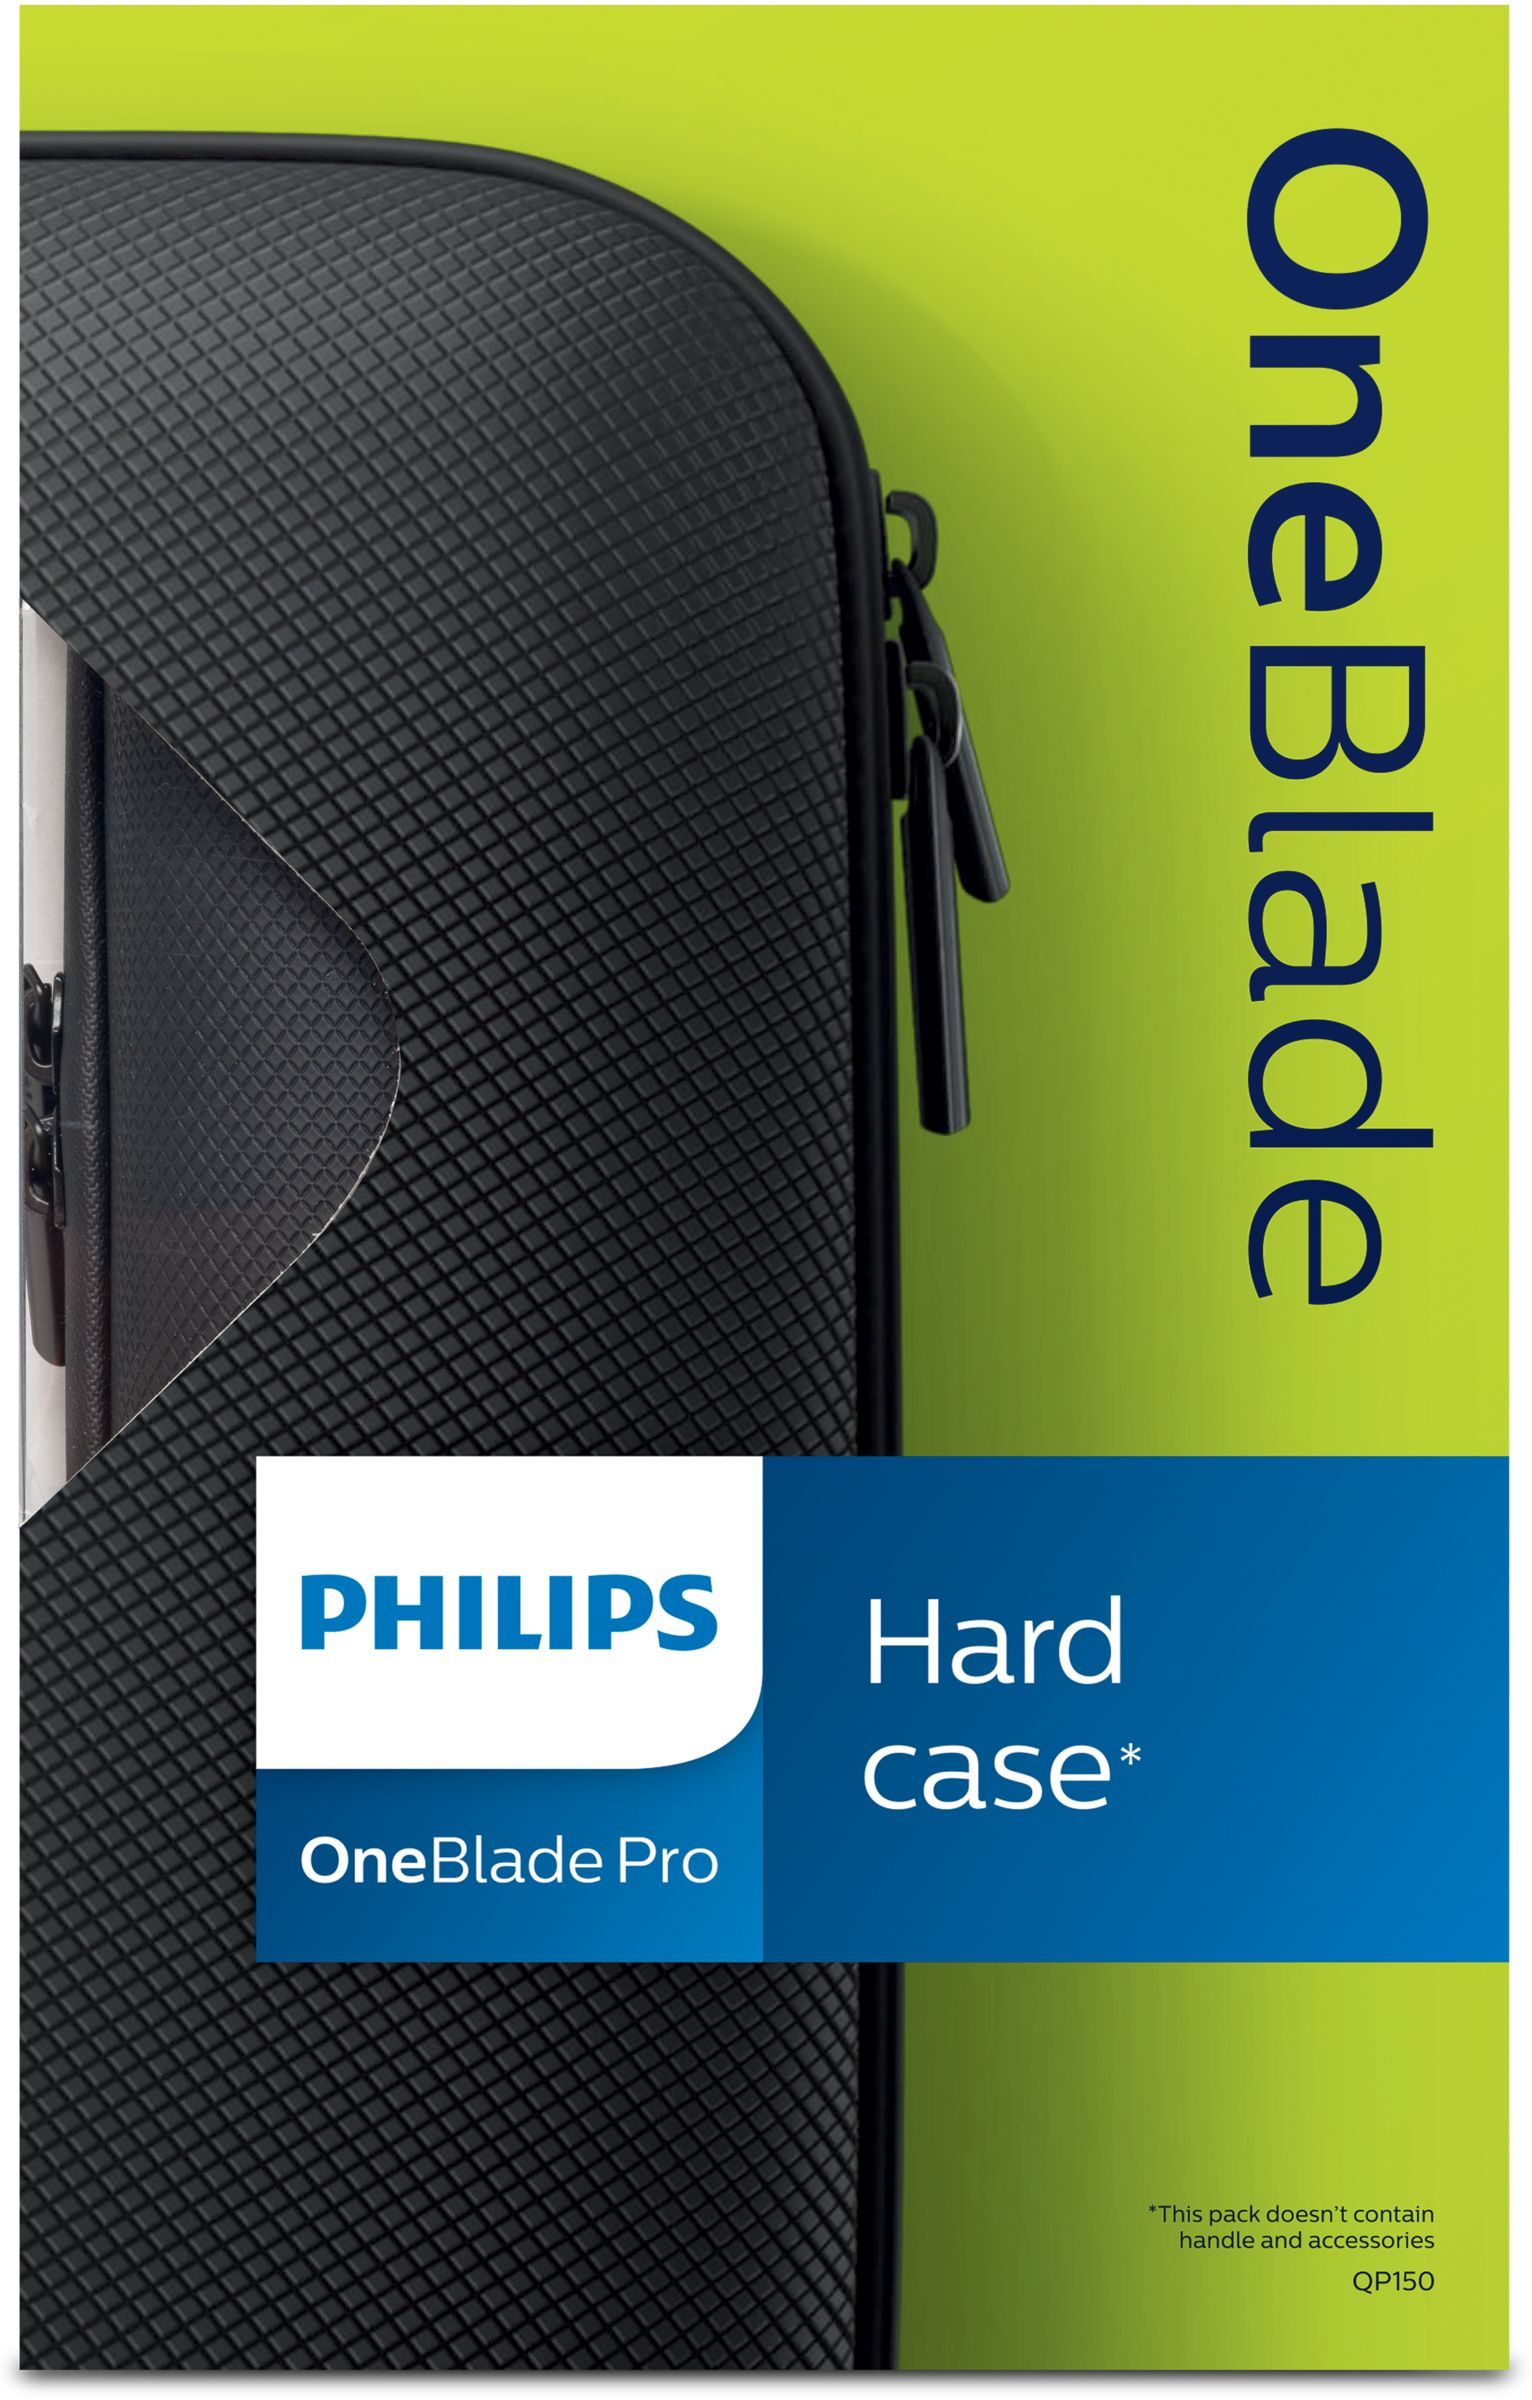 philips one blade pro case